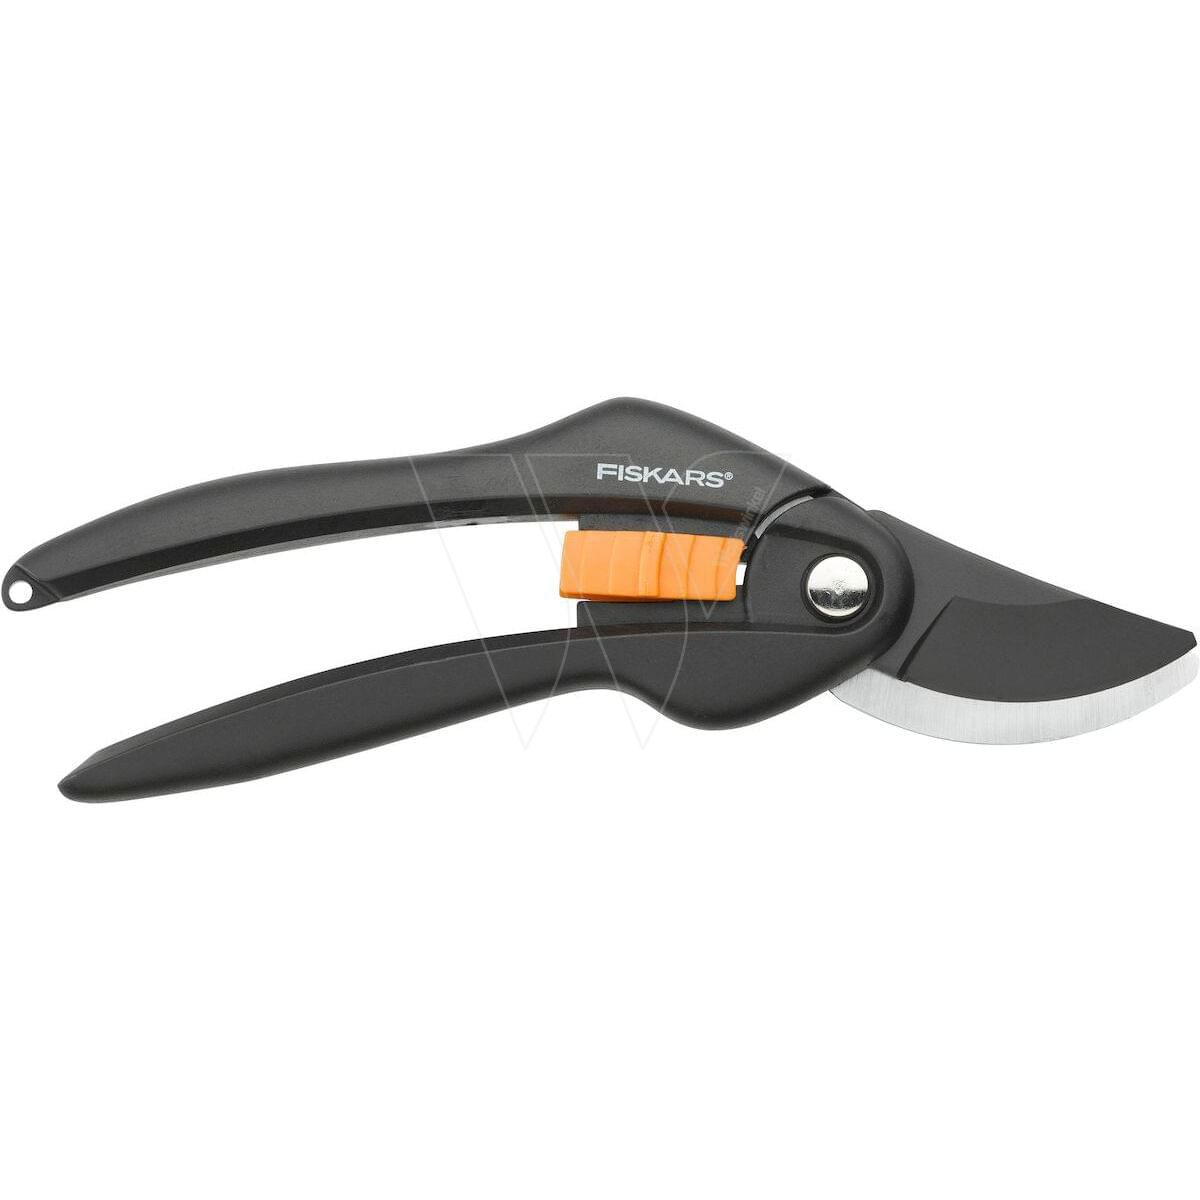  MEPEREZ Germany pruning shears for gardening heavy duty -  cutting power 3x - easier ratcheting pruners for weak hands & arthritis- 8”  anvil garden clippers - sharp blade for effortless